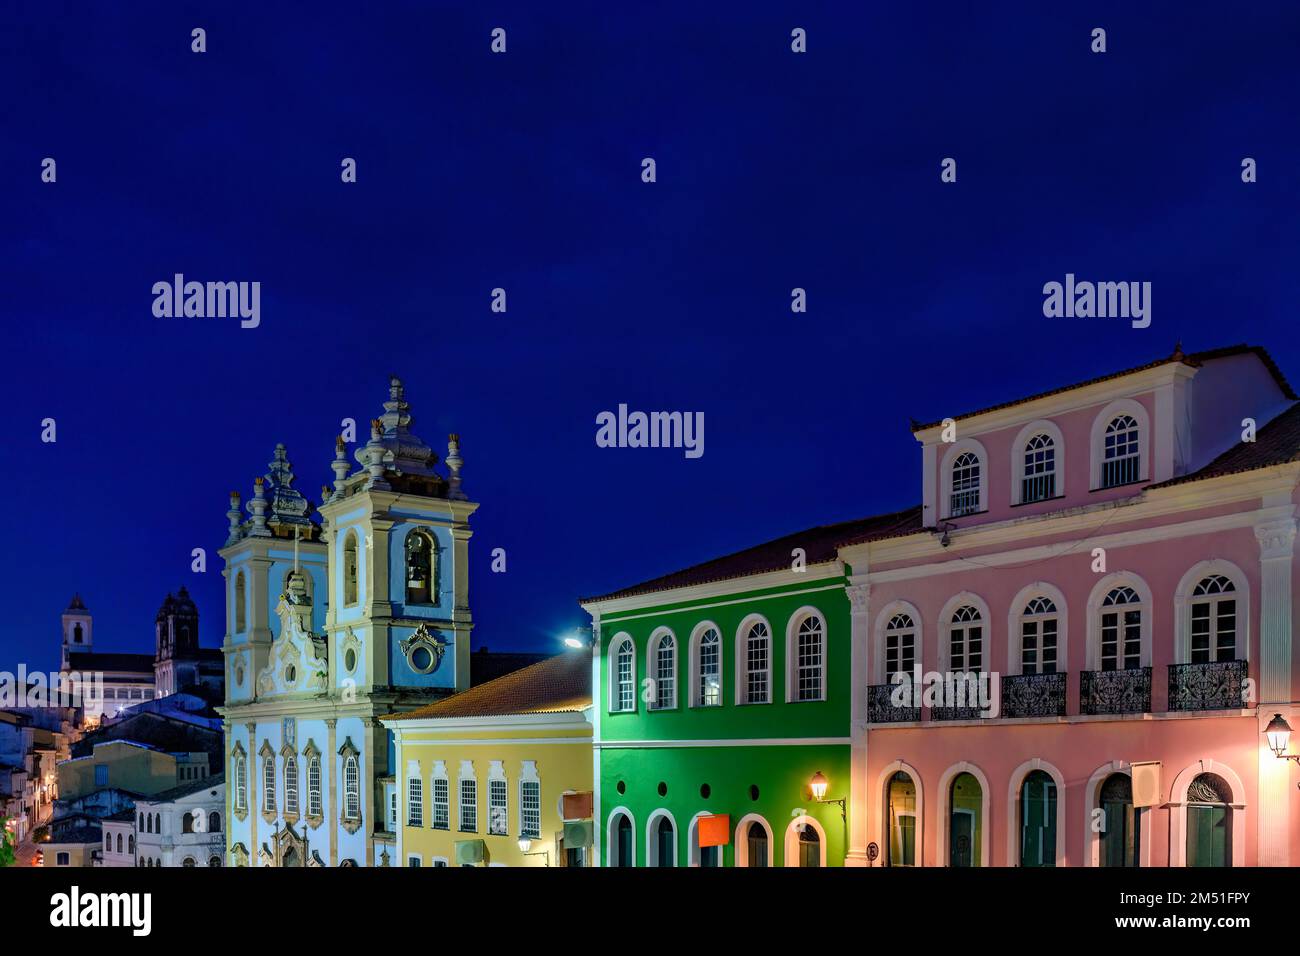 The Pelourinho neighborhood in Salvador seen at night with its historic houses and churches illuminated Stock Photo